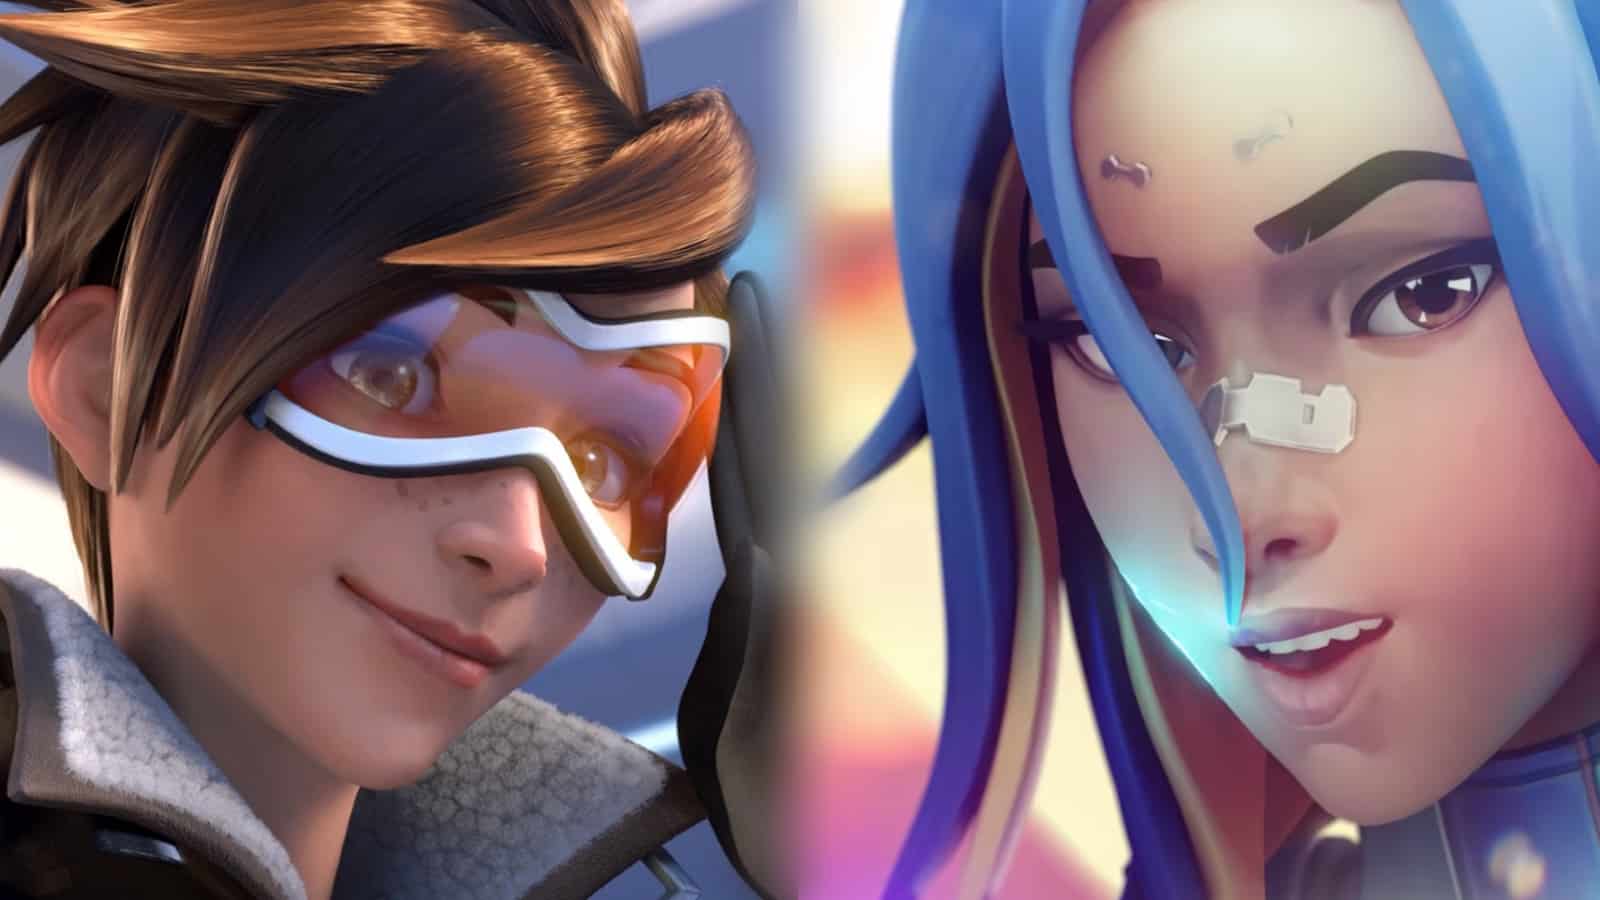 Overwatch: Tracer / Characters - TV Tropes